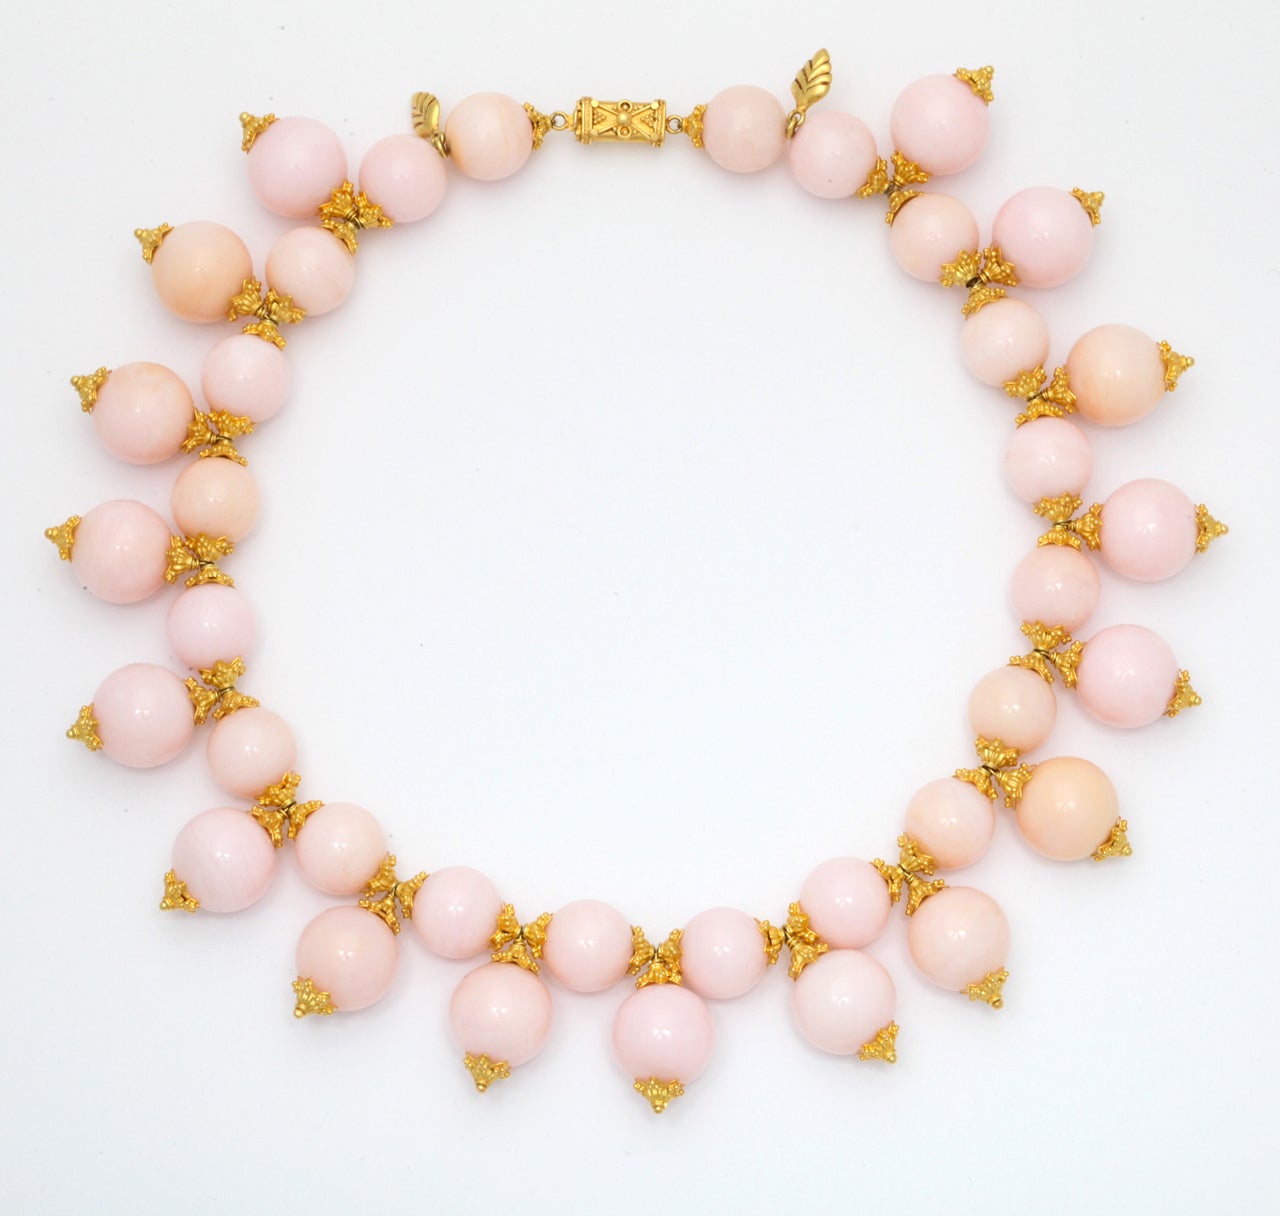 A necklace composed of peruvian opal beads, 22kt yellow gold flower caps, 18kt yellow gold headpins and an 18kt yellow gold clasp. 
This can be made longer.
Length: 16 inches
Width: 1.25 inches